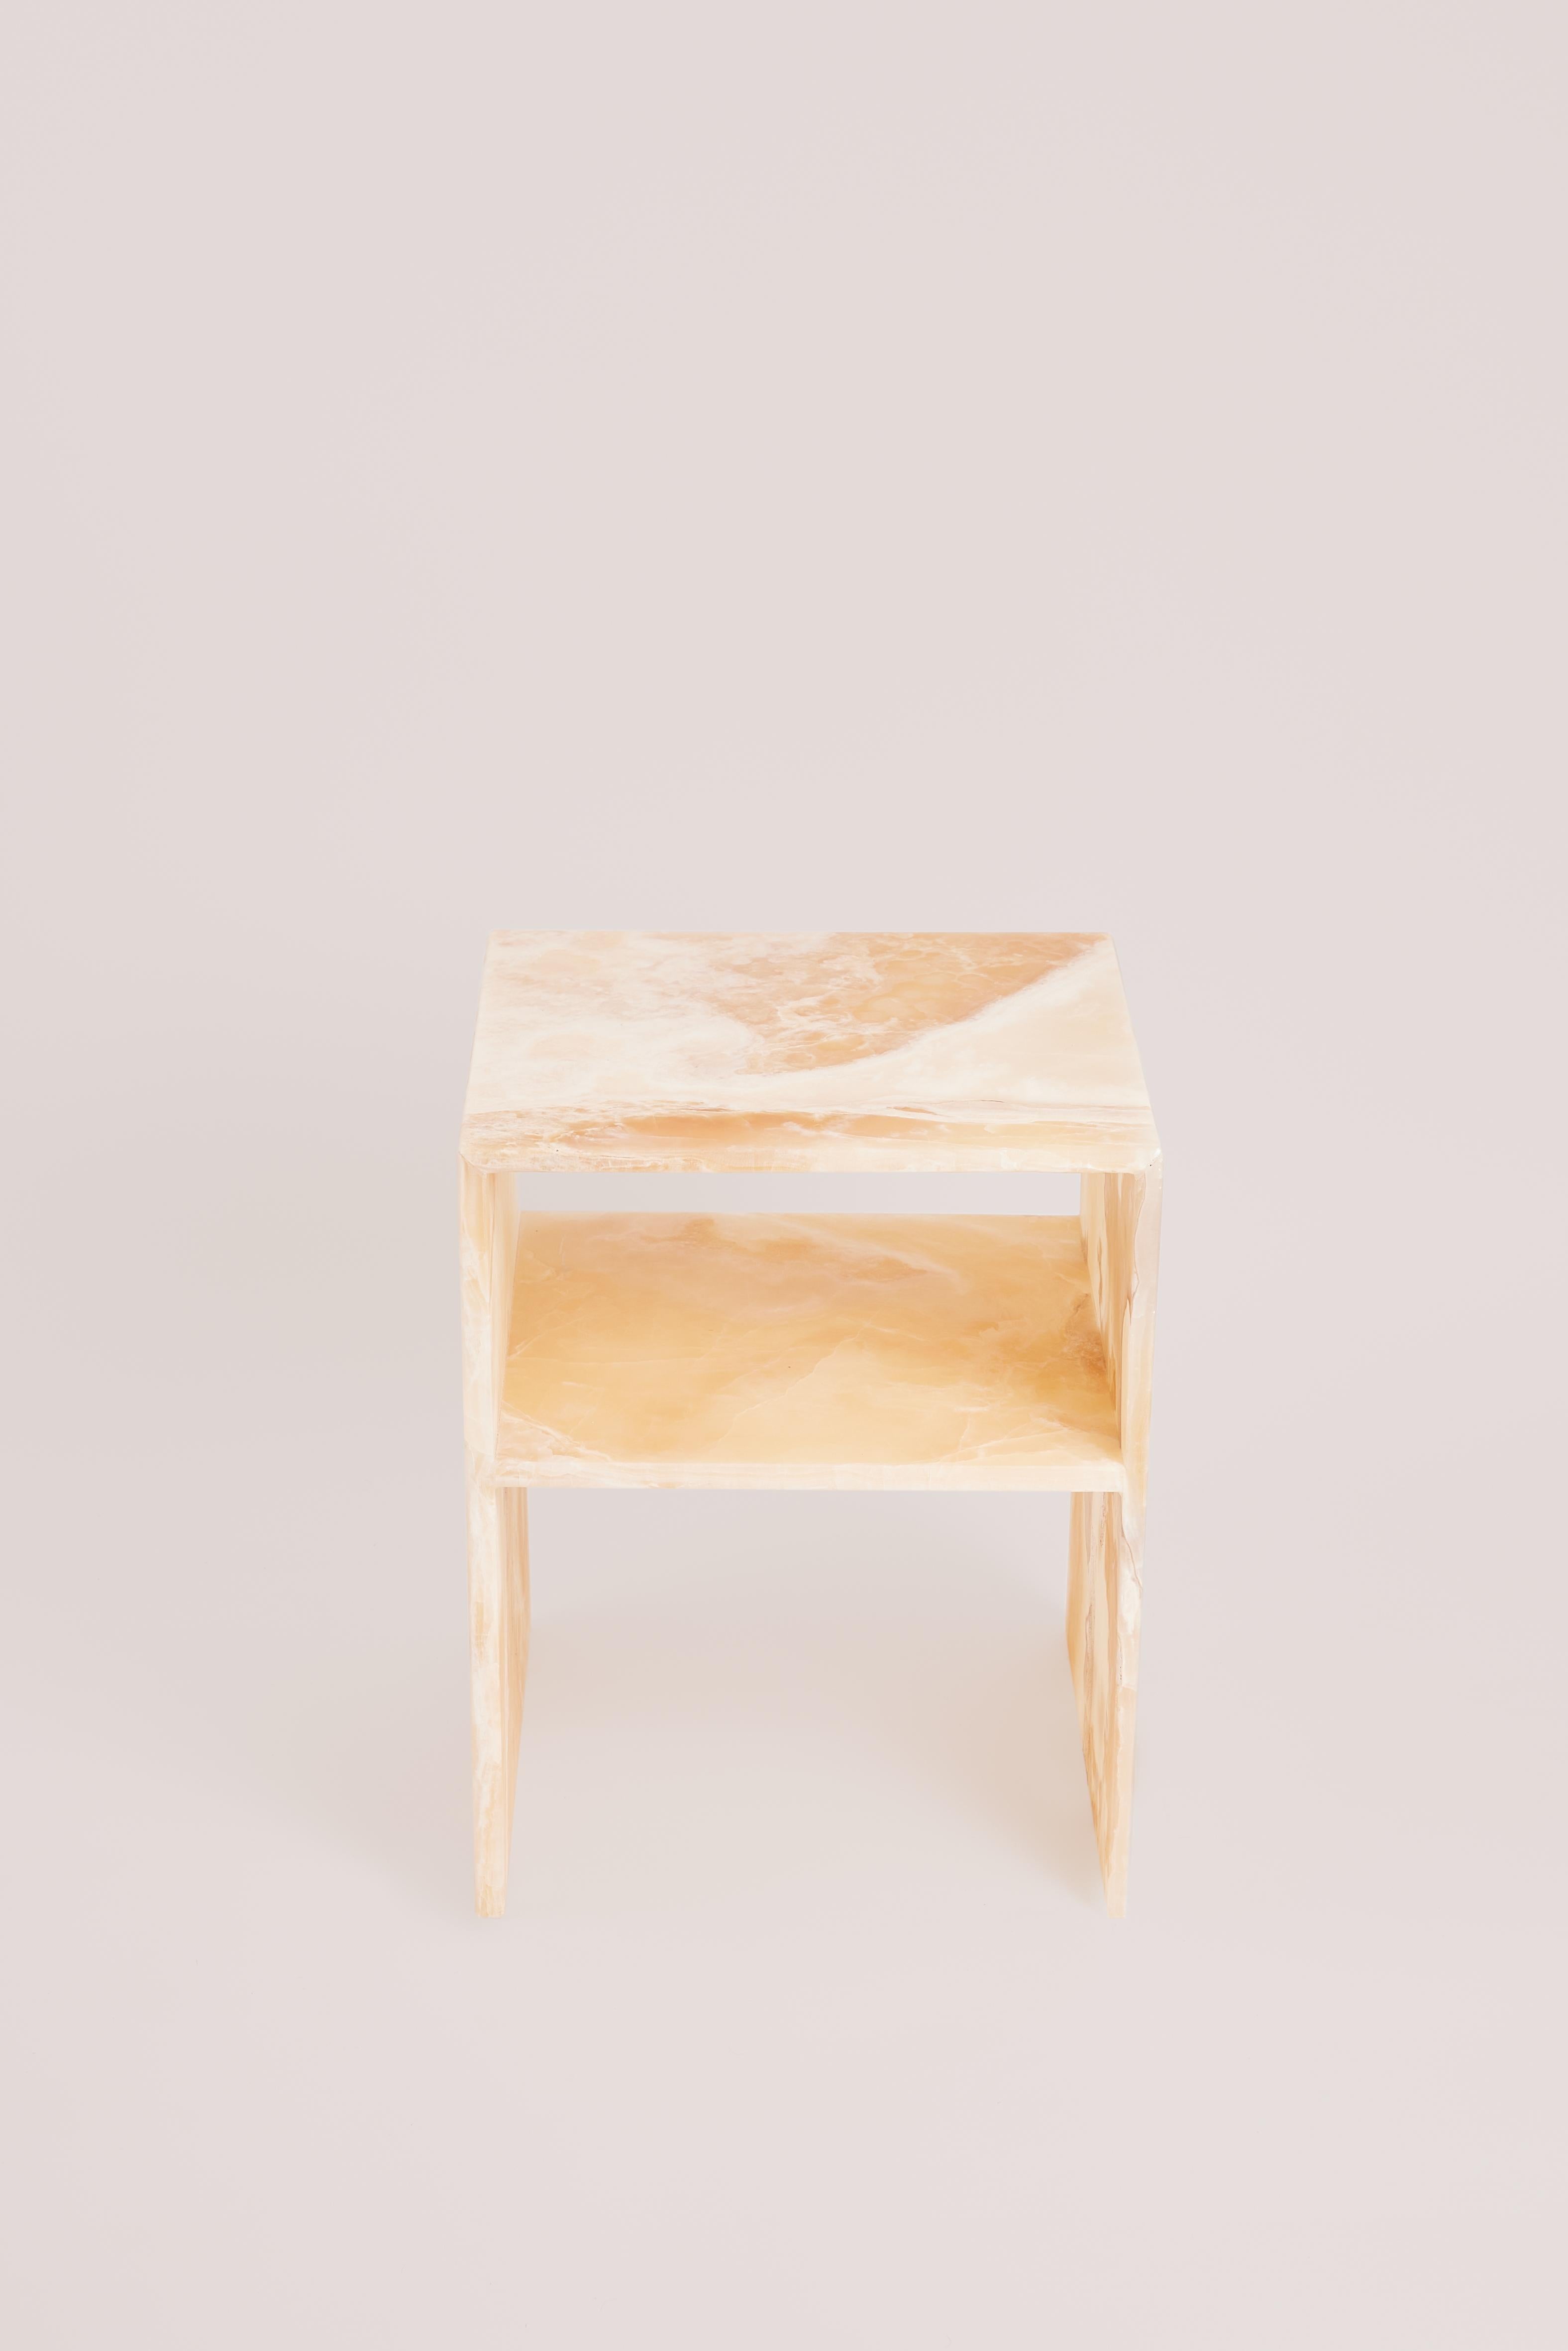 French Amber Onyx Rosa Bedside Table by Studio Gaia Paris For Sale